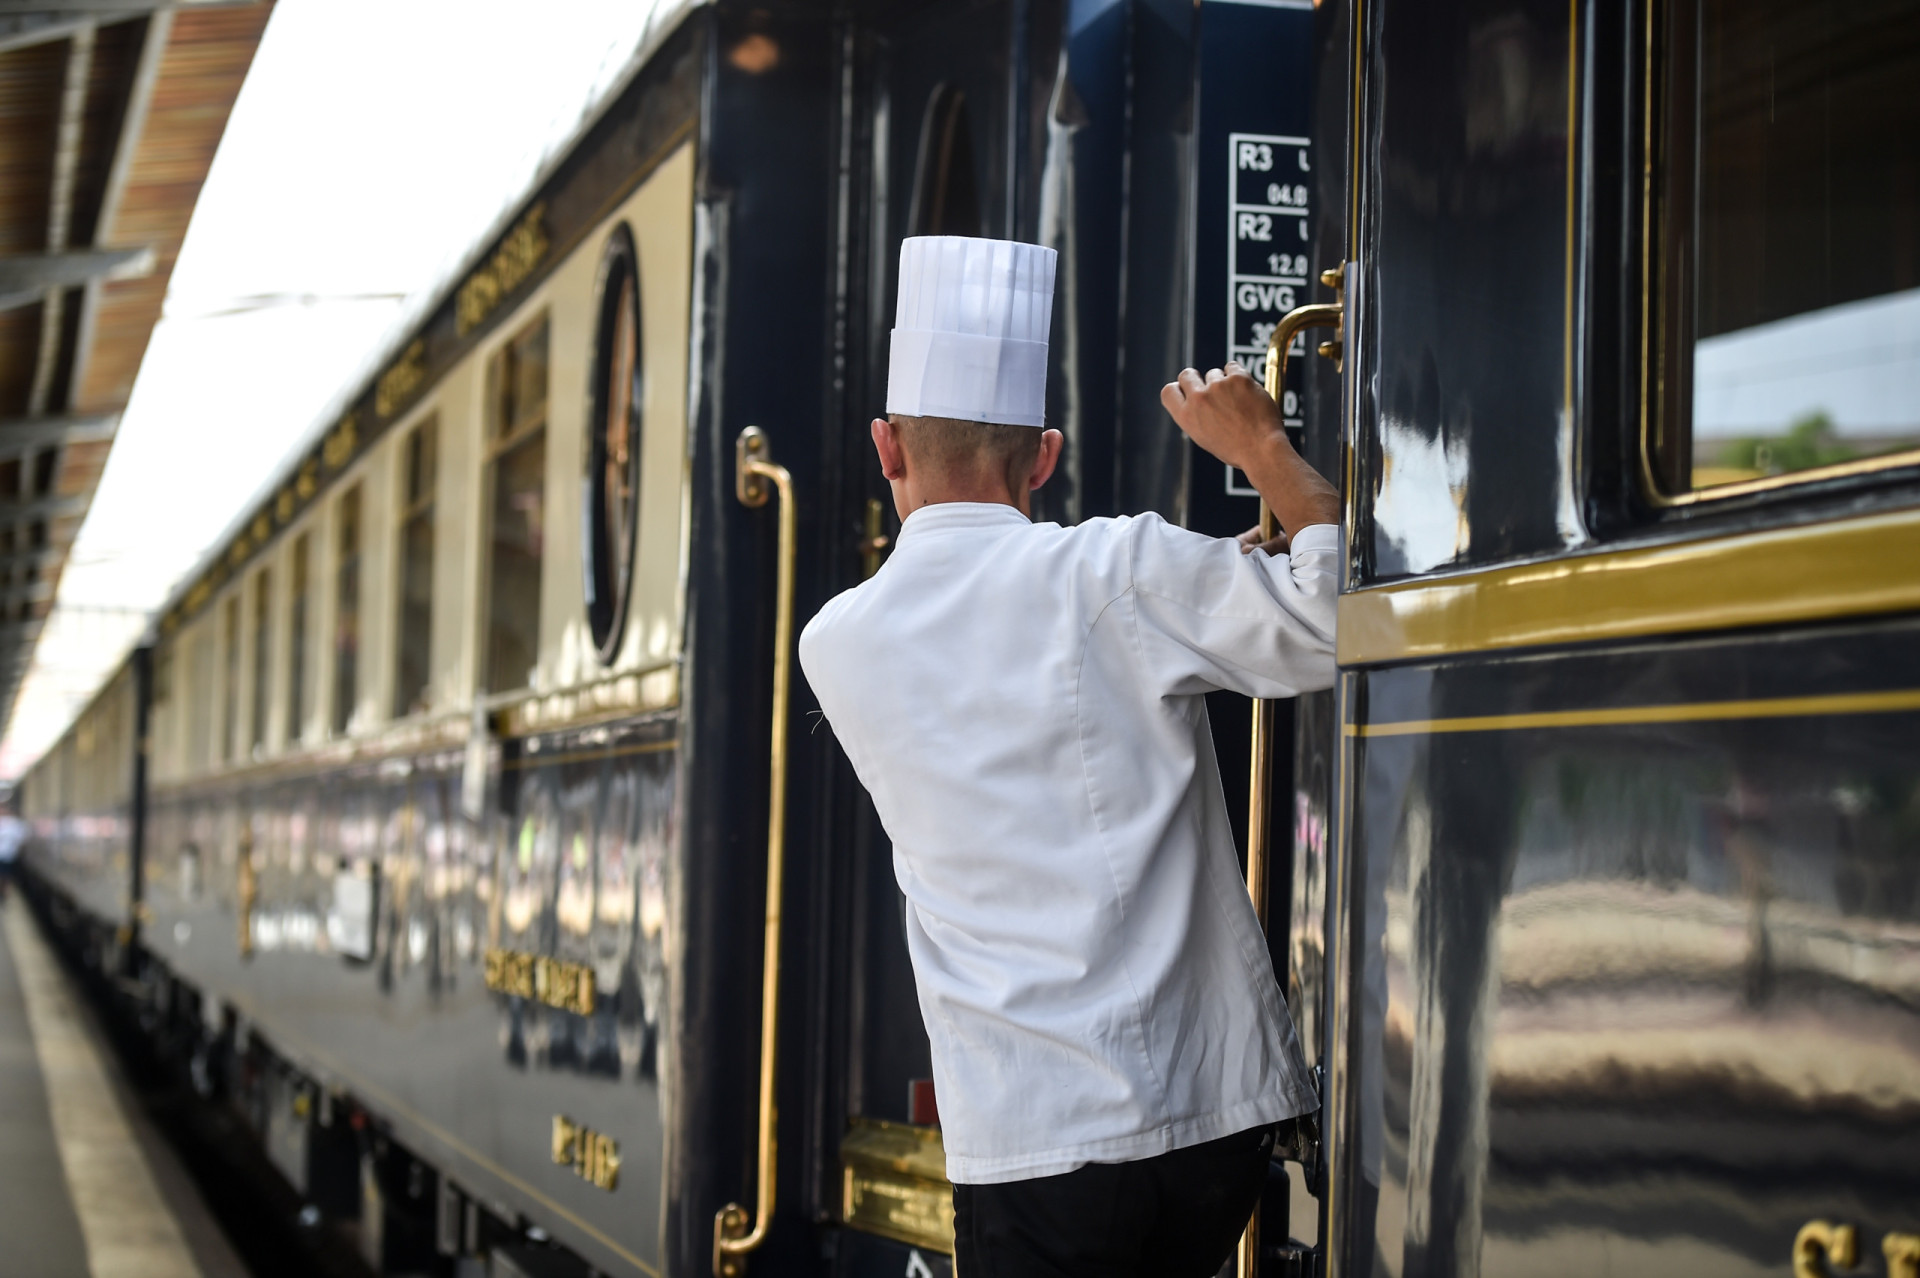 <p>'Murder on the Orient Express' by Agatha Christie takes place on the famous luxury train. While the original Orient Express no longer runs, a journey on the Venice Simplon-Orient-Express offers a taste of the opulence and mystery that Christie's detective, Hercule Poirot, encountered.</p><p><a href="https://www.msn.com/en-us/community/channel/vid-7xx8mnucu55yw63we9va2gwr7uihbxwc68fxqp25x6tg4ftibpra?cvid=94631541bc0f4f89bfd59158d696ad7e">Follow us and access great exclusive content every day</a></p>